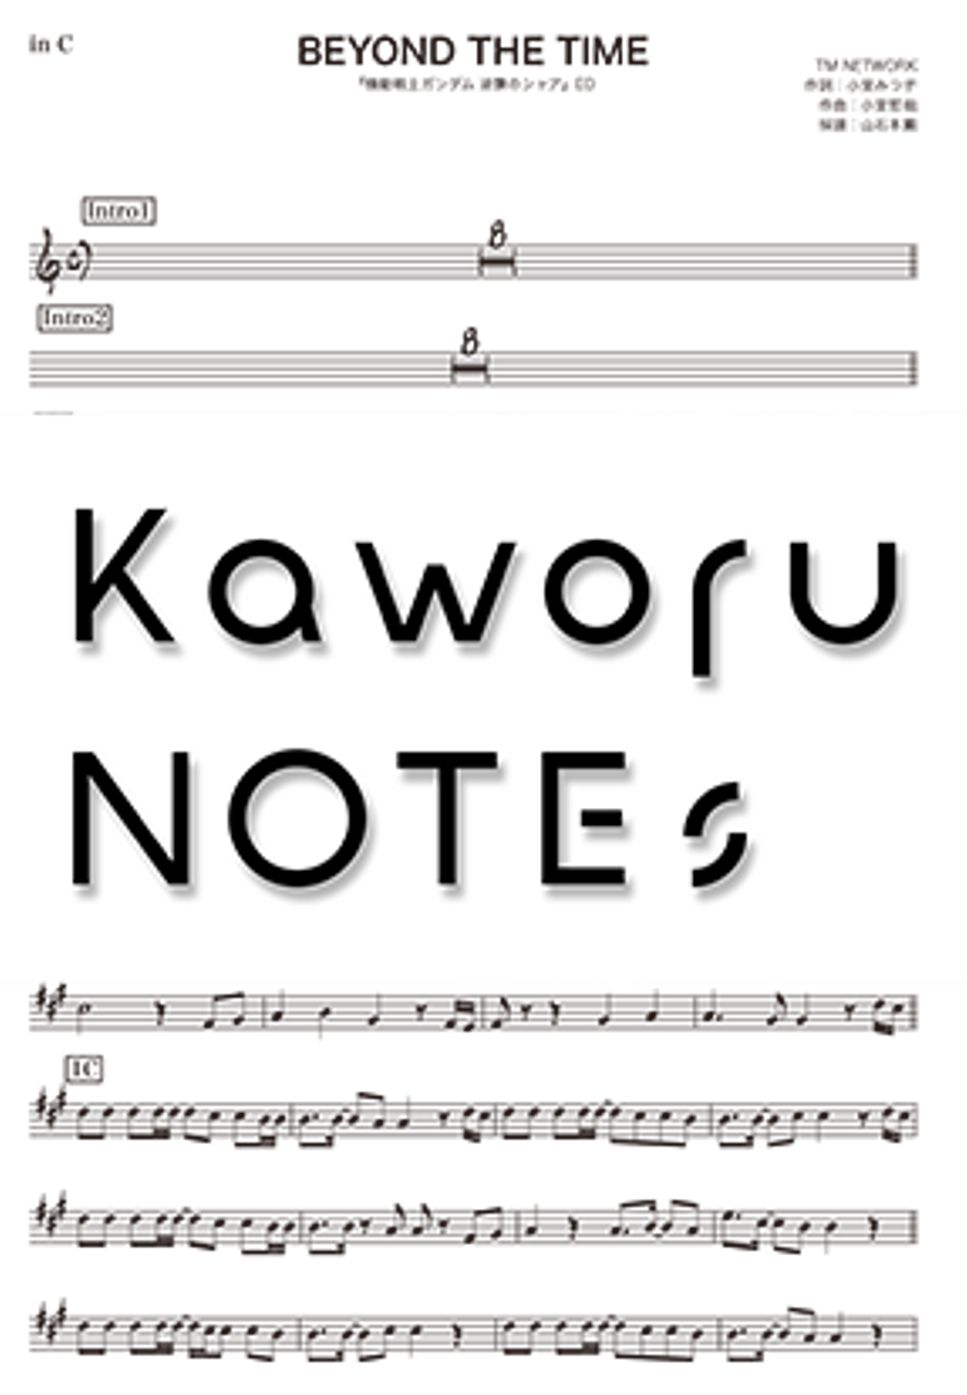 TM NETWORK - BEYOND THE TIME（in E♭/Mobile Suit Gundam Char's Counterattack） by Kaworu NOTEs